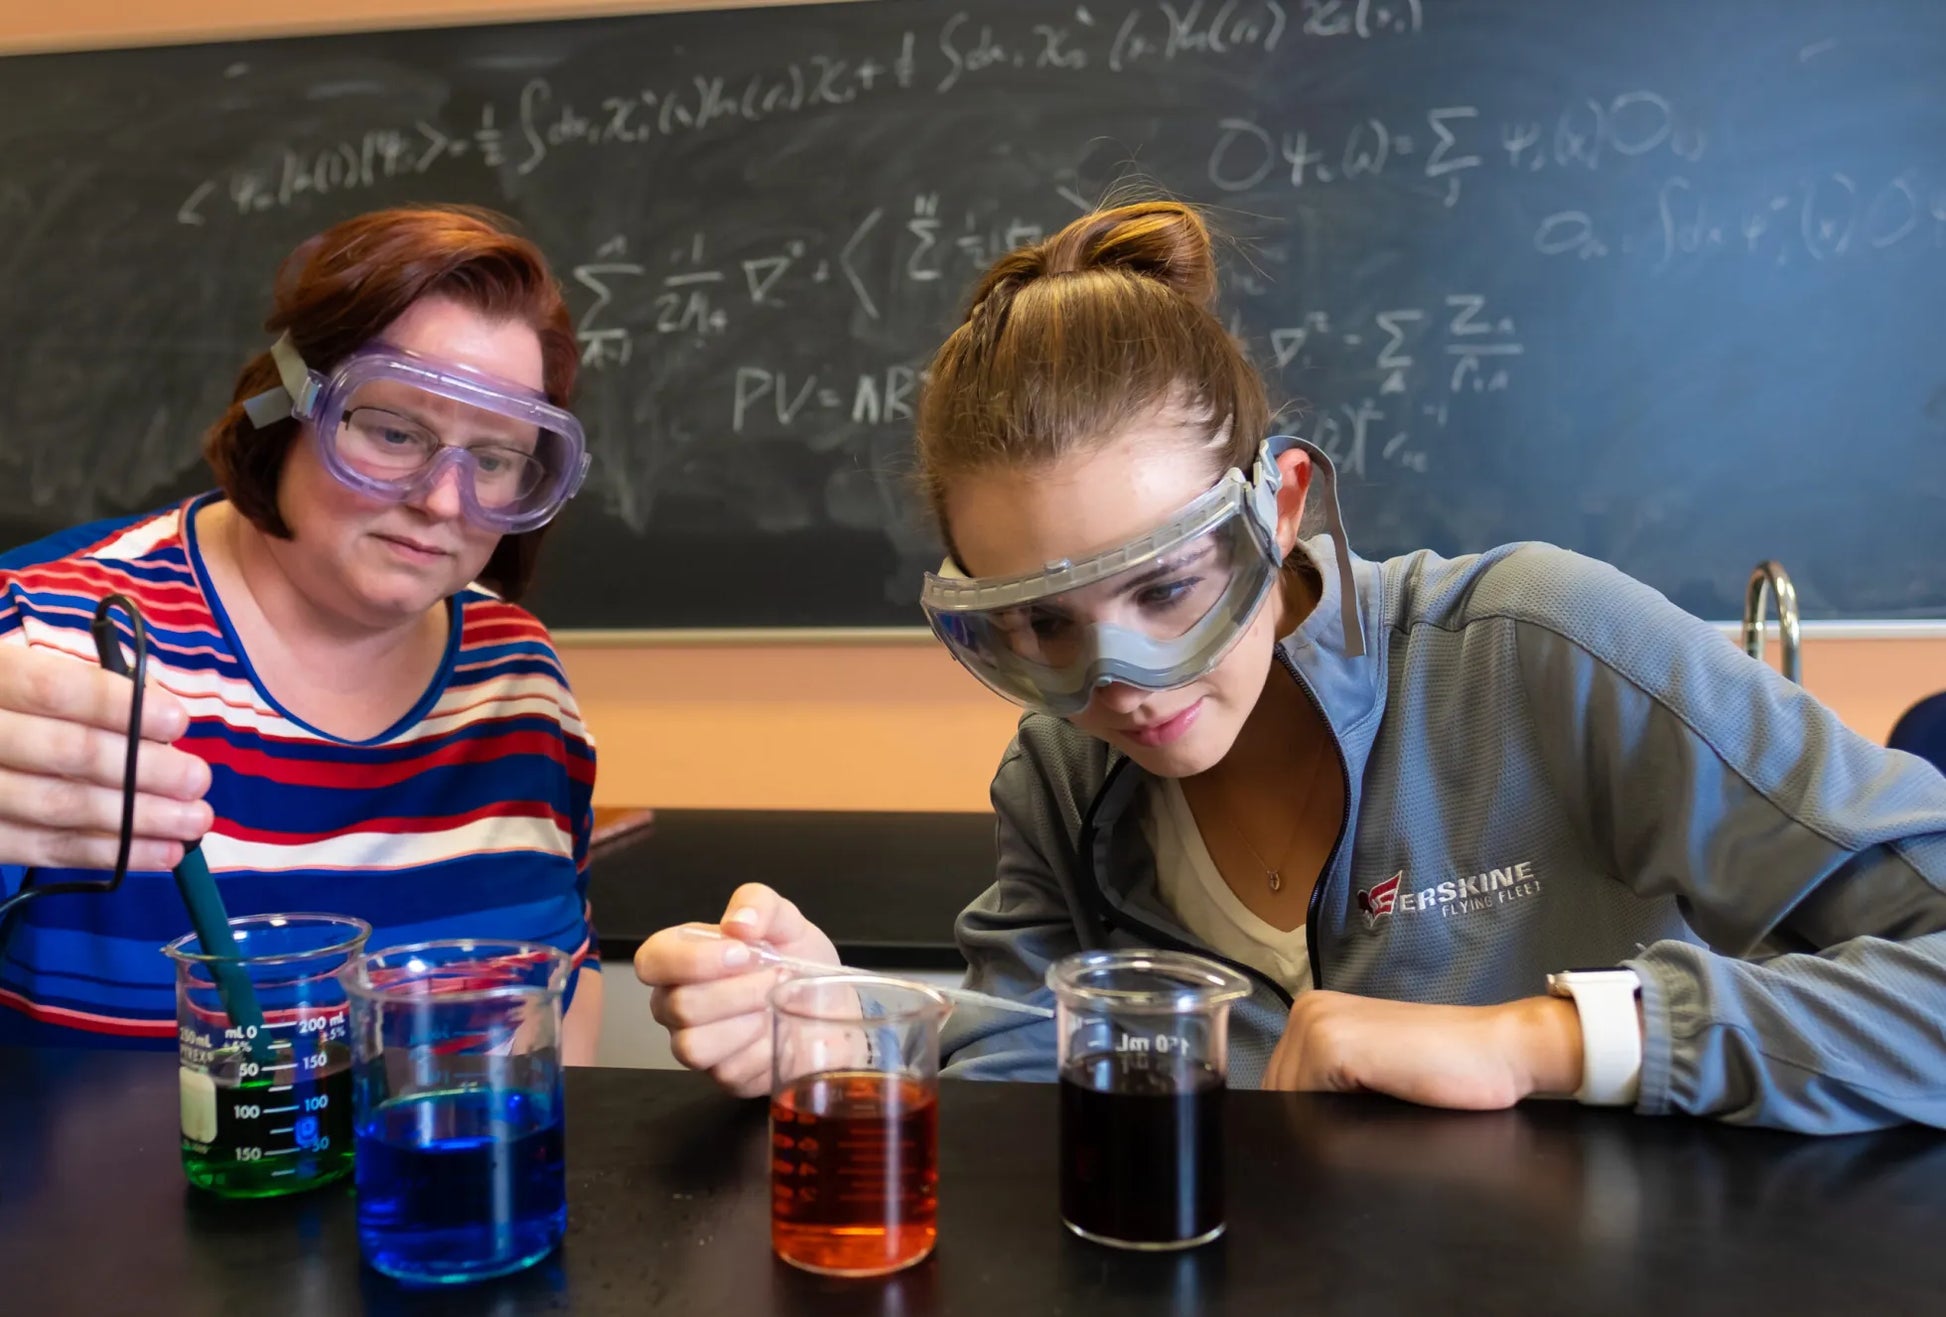 An Erskine professor and student work together in the chemistry lab